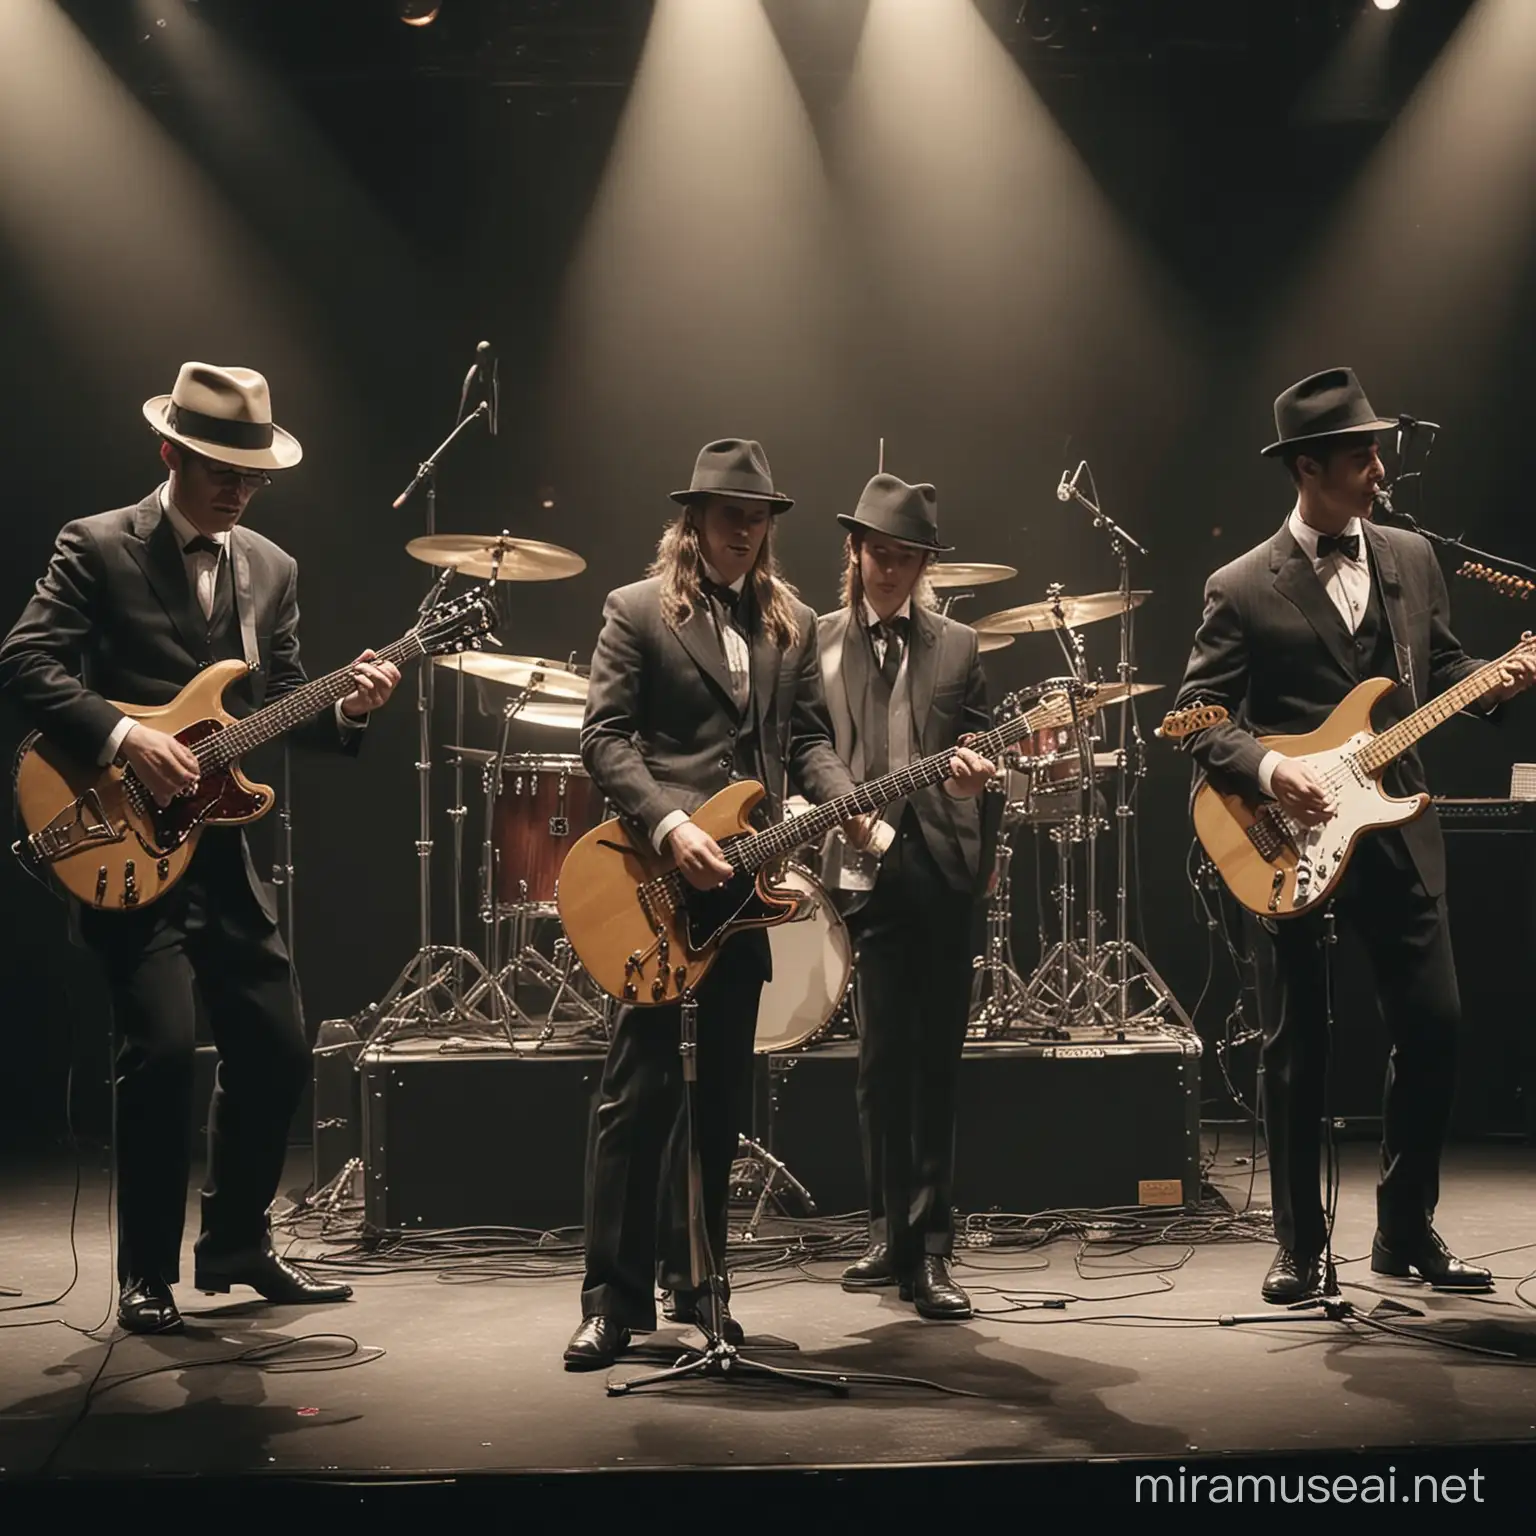 Old School Band Performing Vintage Musical Ensemble with Fedoras on Stage